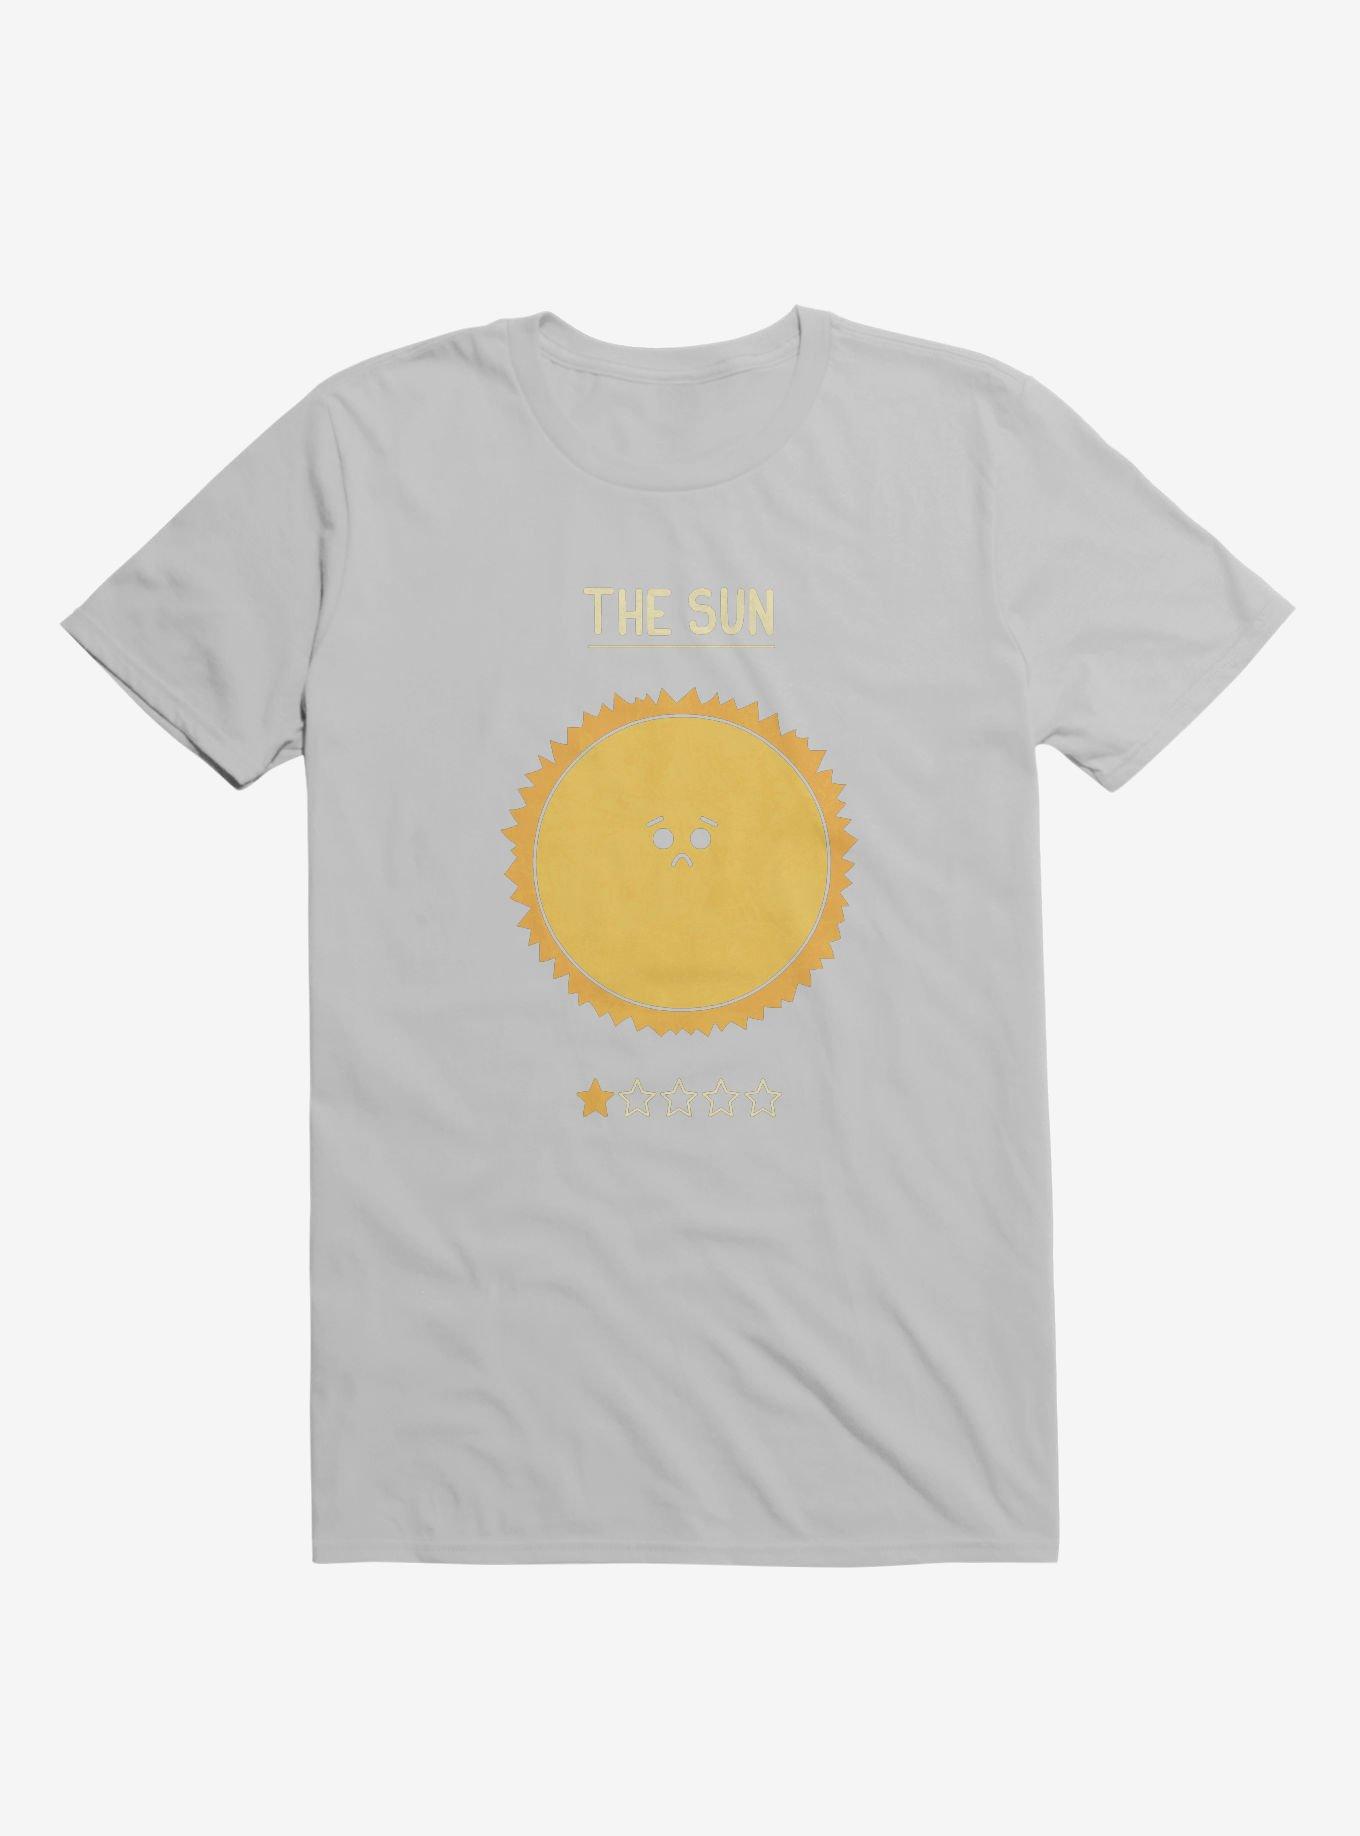 The Sun One Star Rating Ice Grey T-Shirt